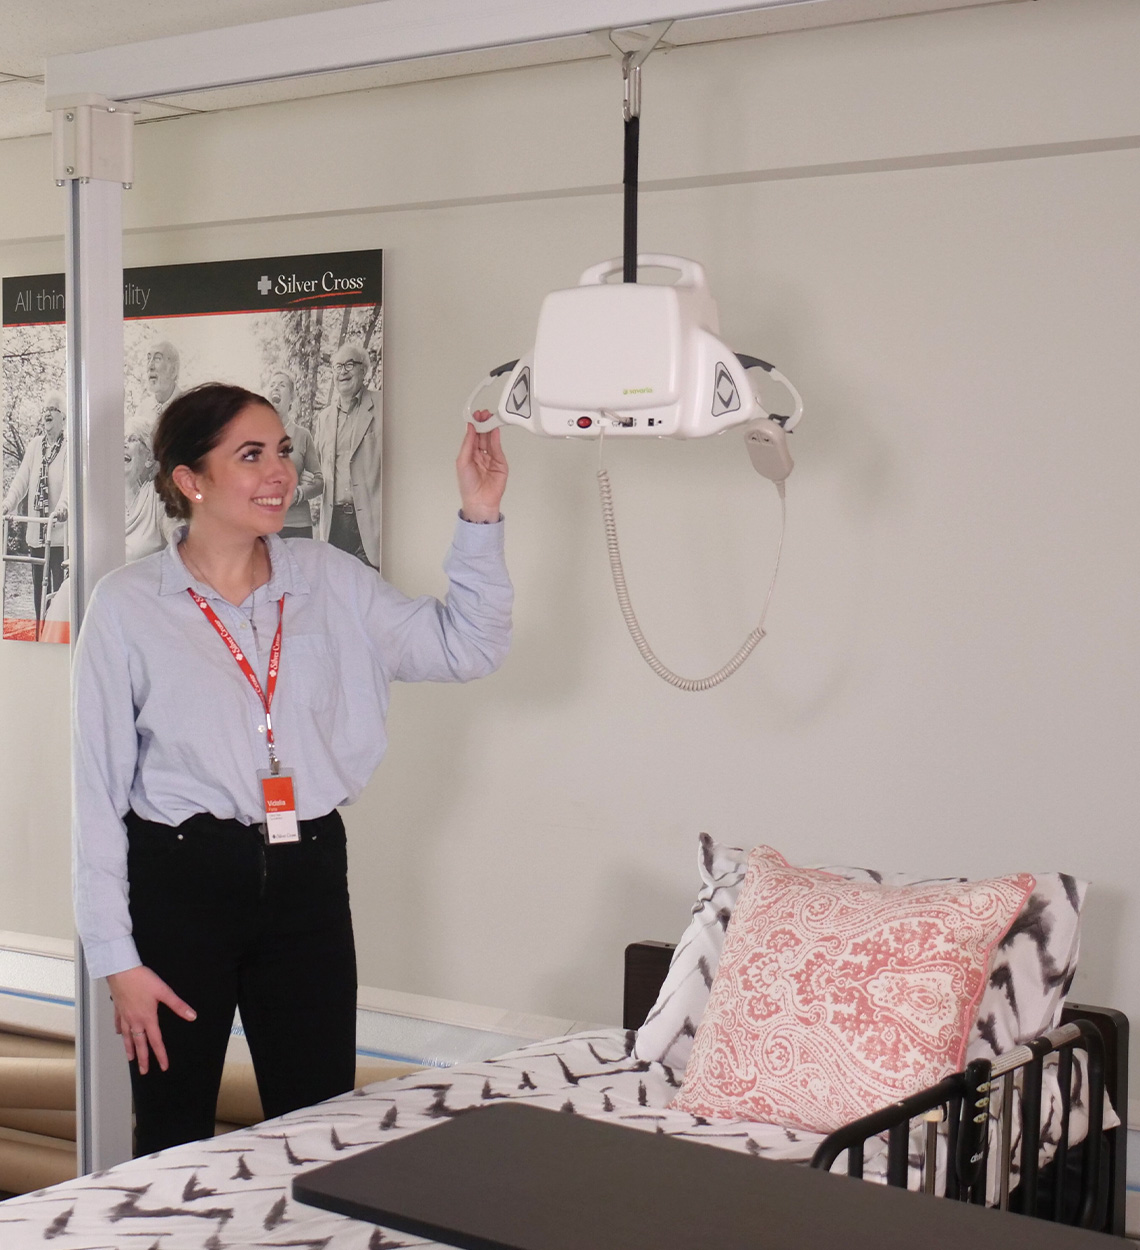 Find a ceiling lift demo in store and get home ceiling lift tips